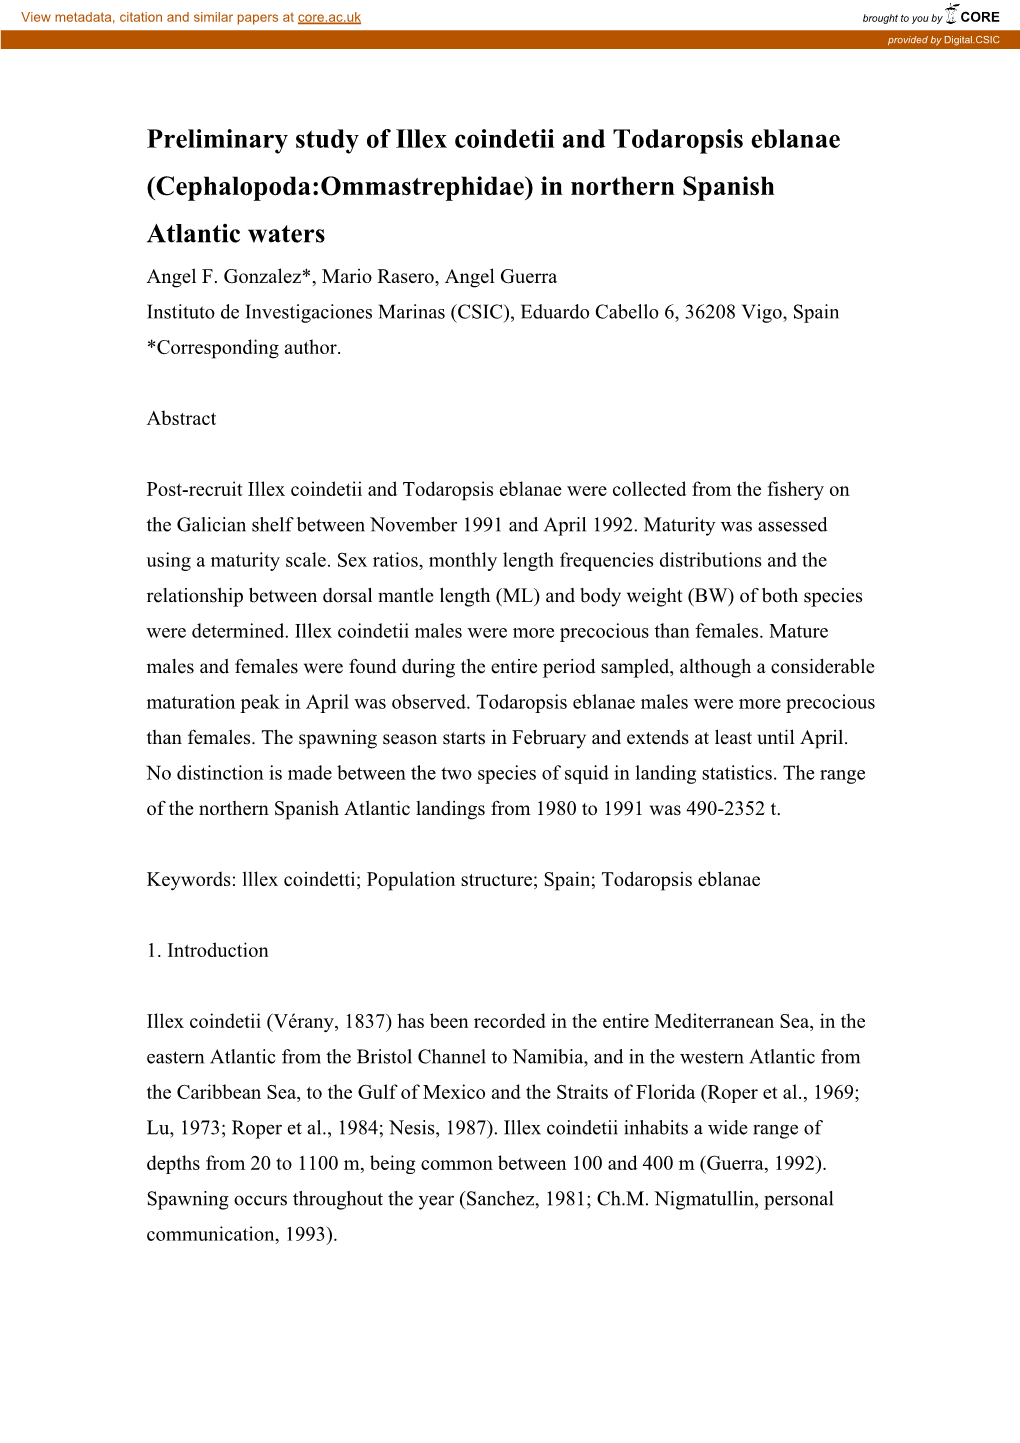 Preliminary Study of Illex Coindetii and Todaropsis Eblanae (Cephalopoda:Ommastrephidae) in Northern Spanish Atlantic Waters Angel F